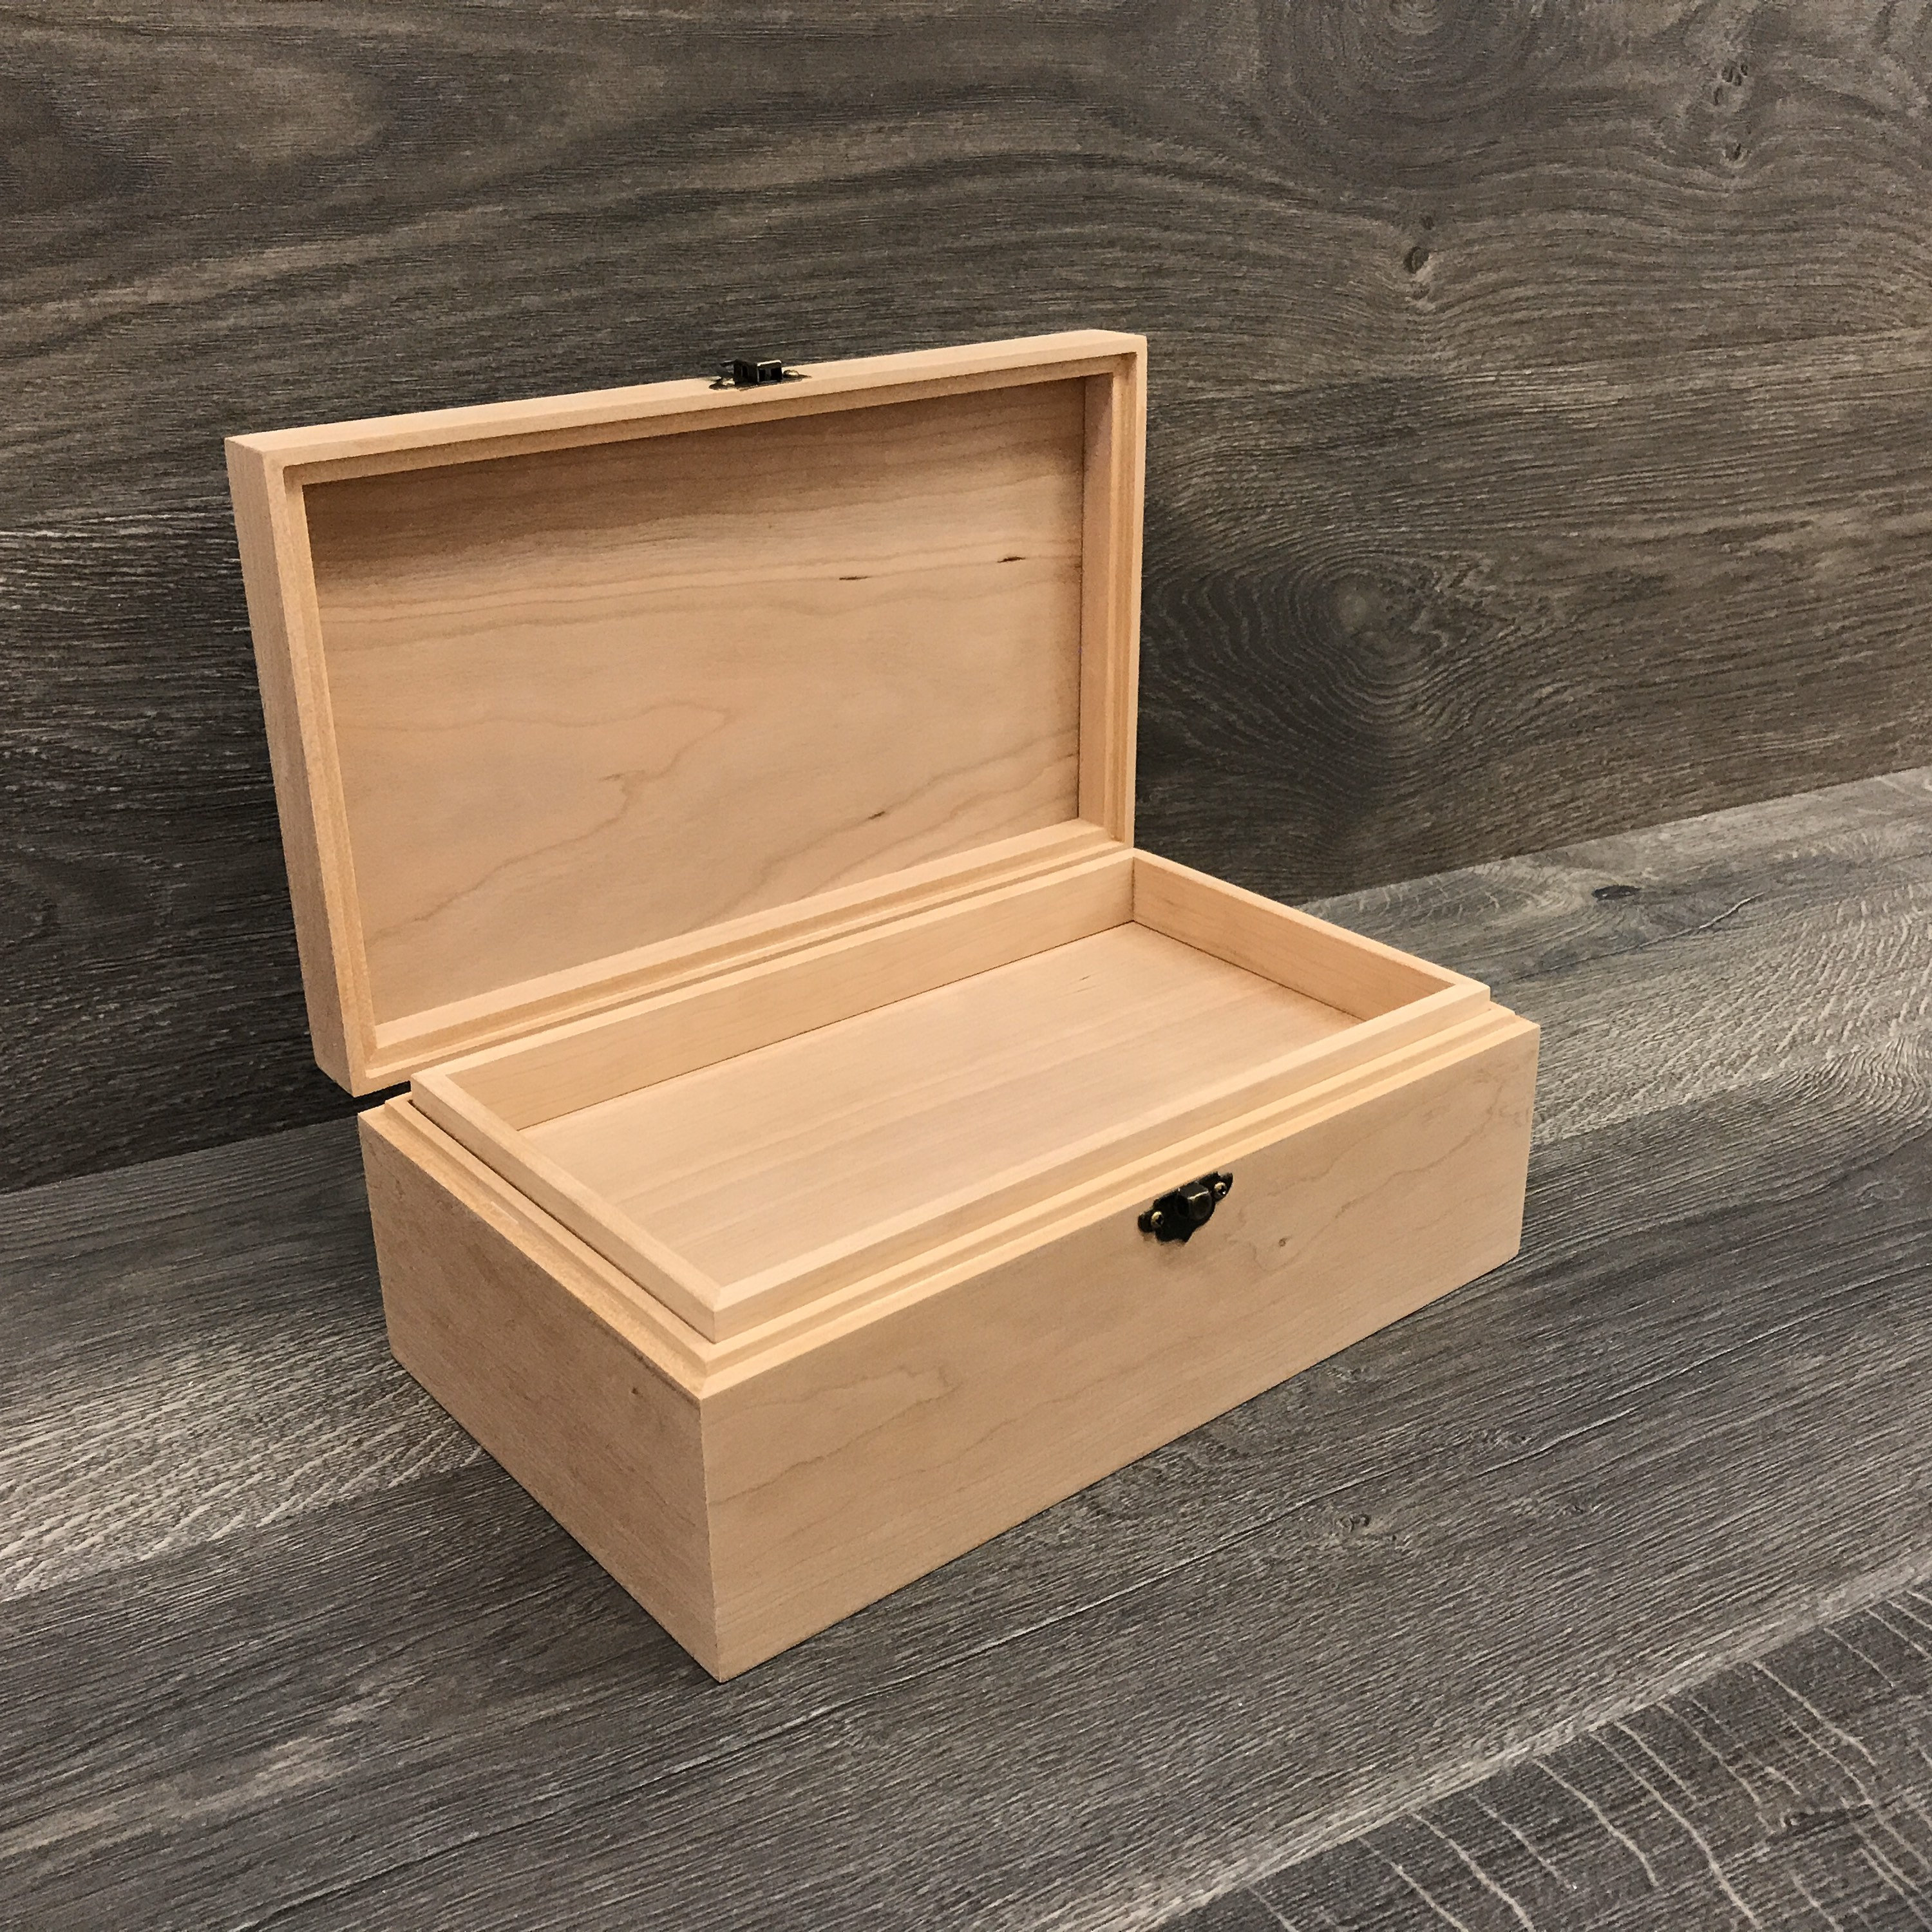 Unfinished Wood Box With Hinges & Tray-10 X 6 X 3 3/4-handmade